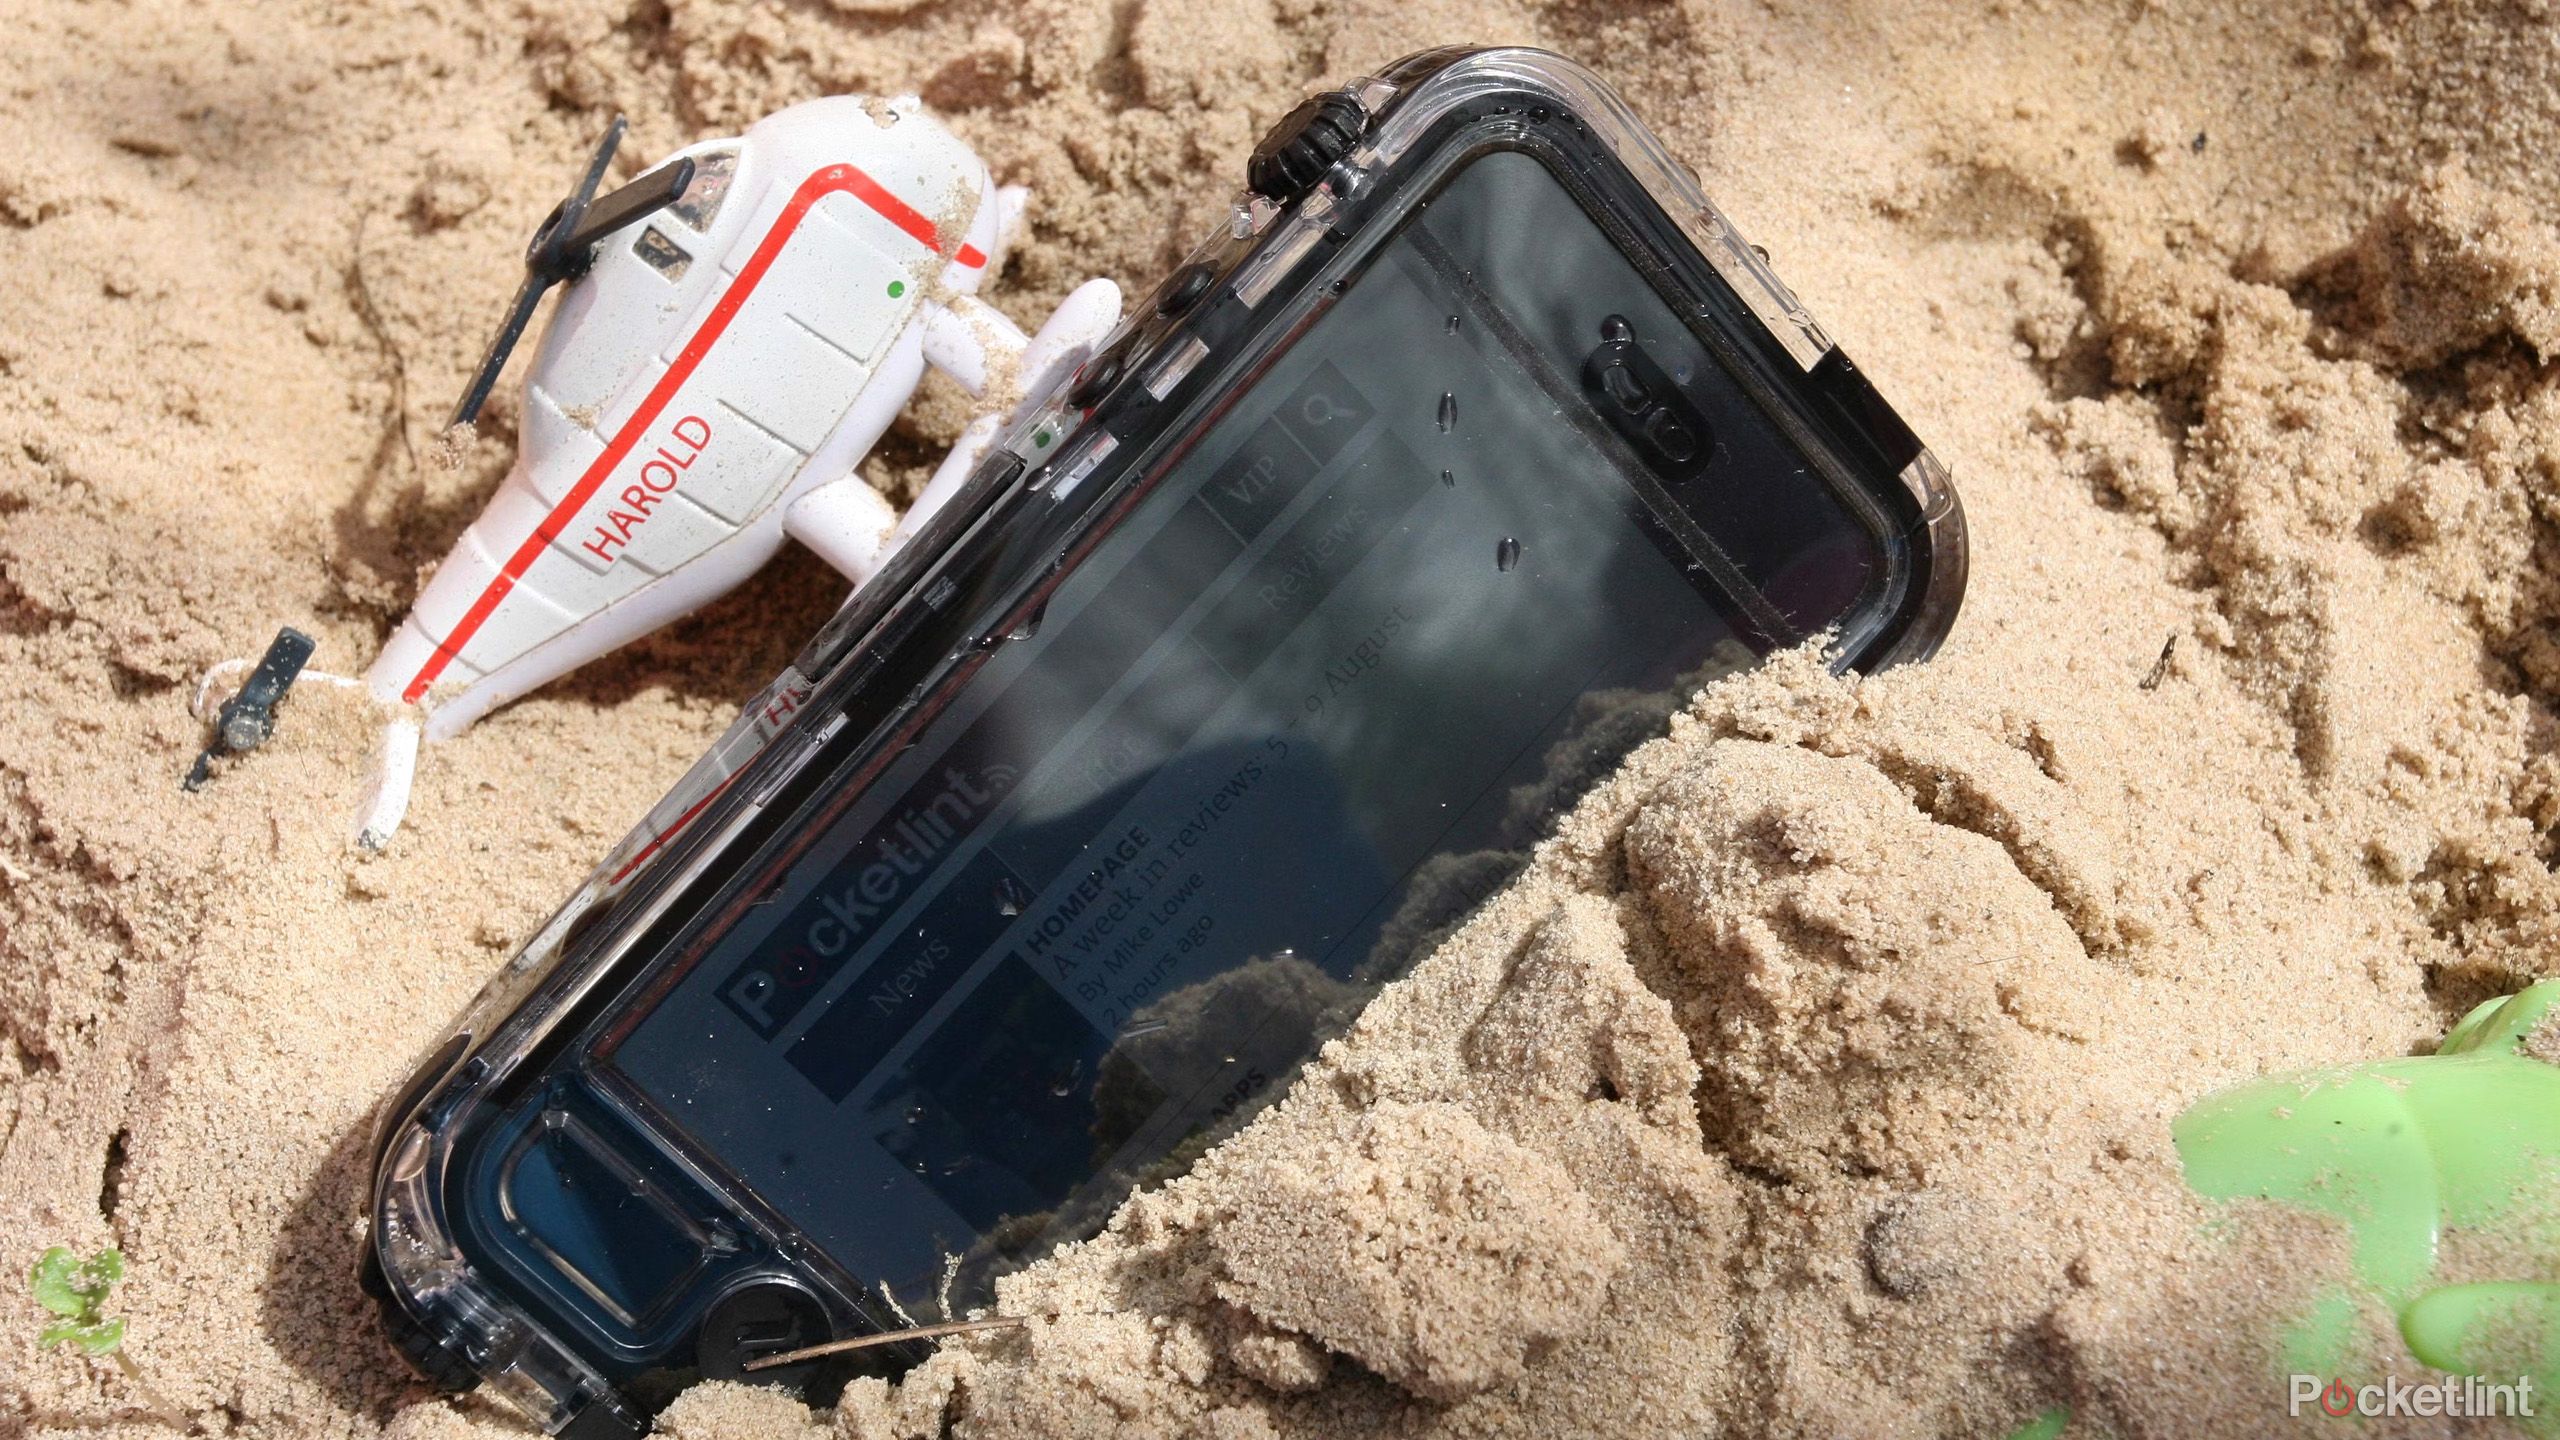 A smartphone in the sand